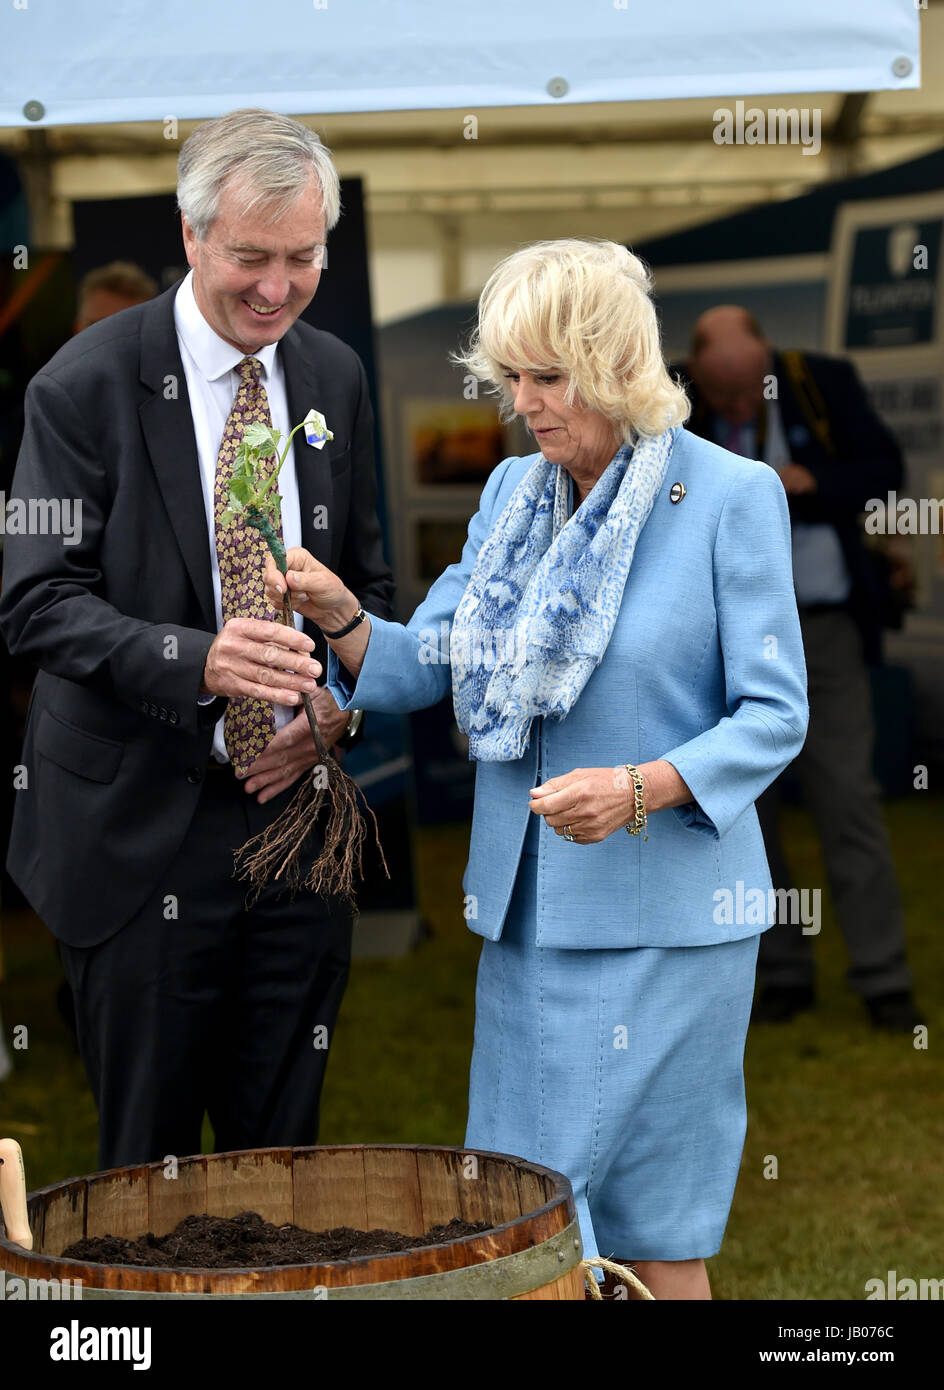 Ardingly Sussex, UK. 8th June, 2017. Camilla the Duchess of Cornwall plants a vine at the South of England Show held at the Ardingly Showground in Sussex . The South of England Agricultural Society is celebrating its 50th anniversary this year showcasing the best of agriculture, horticulture and the countryside in the South of England. Credit: Simon Dack/Alamy Live News Stock Photo